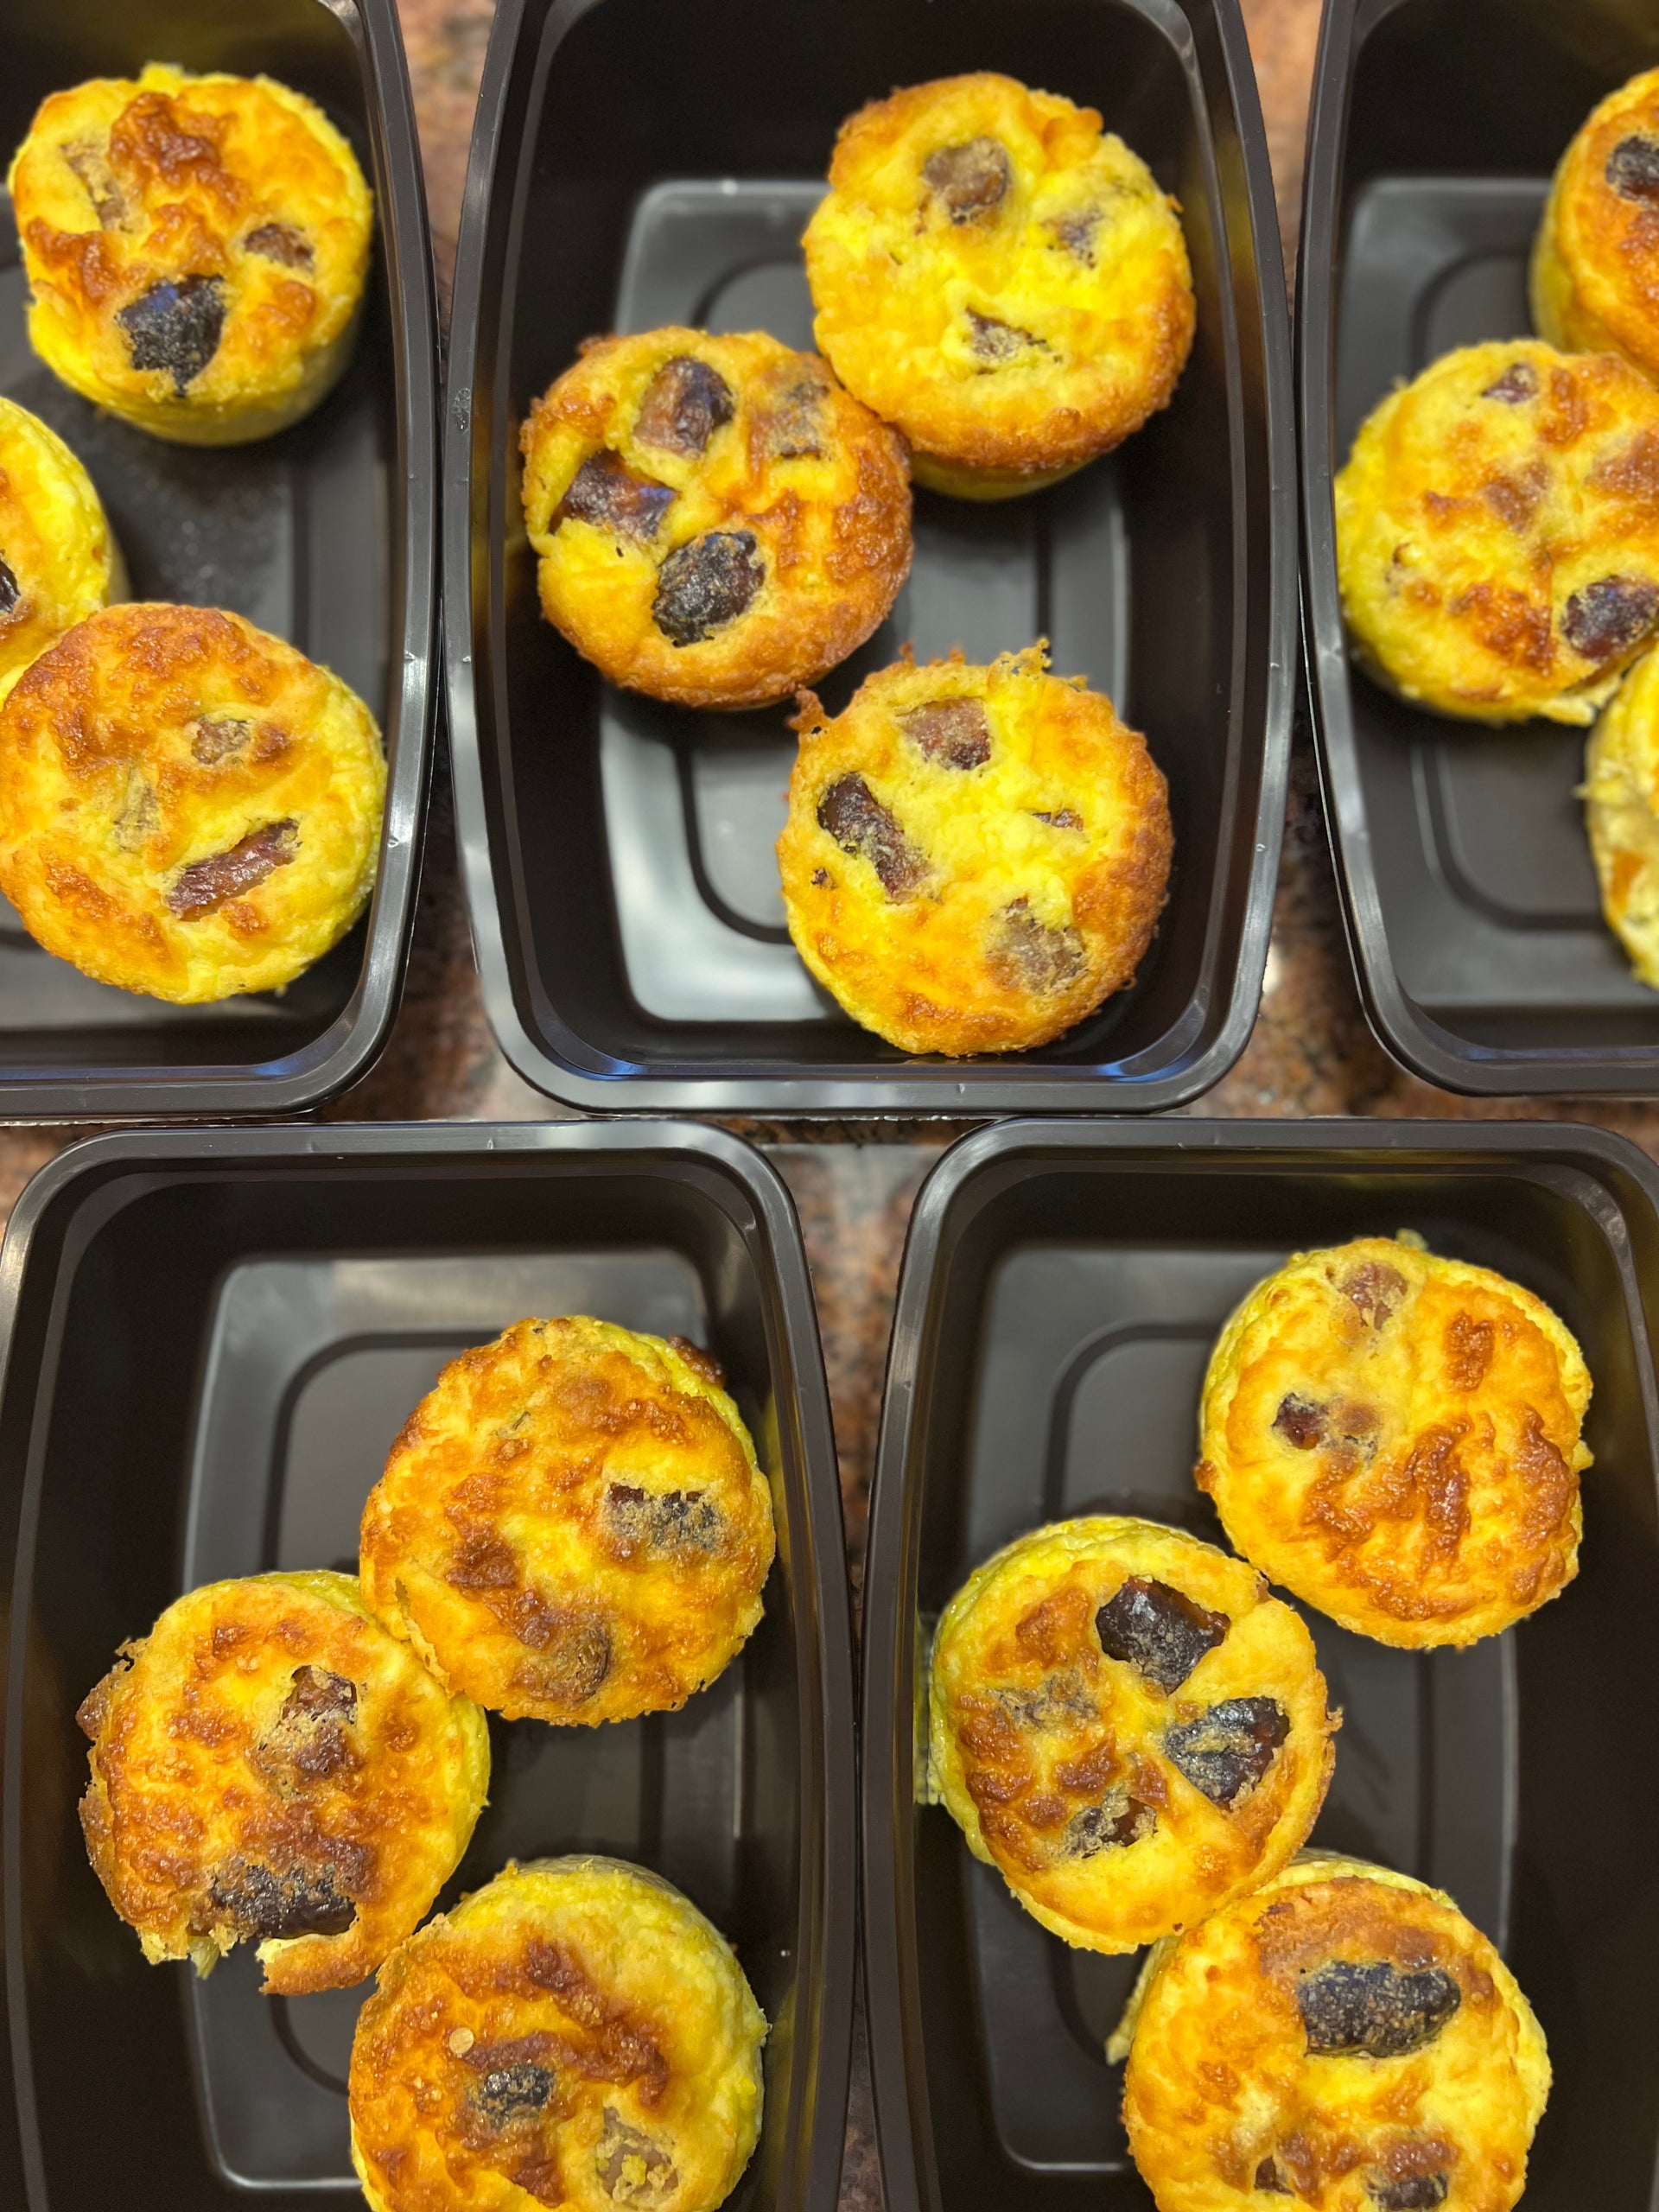 Breakfast Meal: Egg Muffins